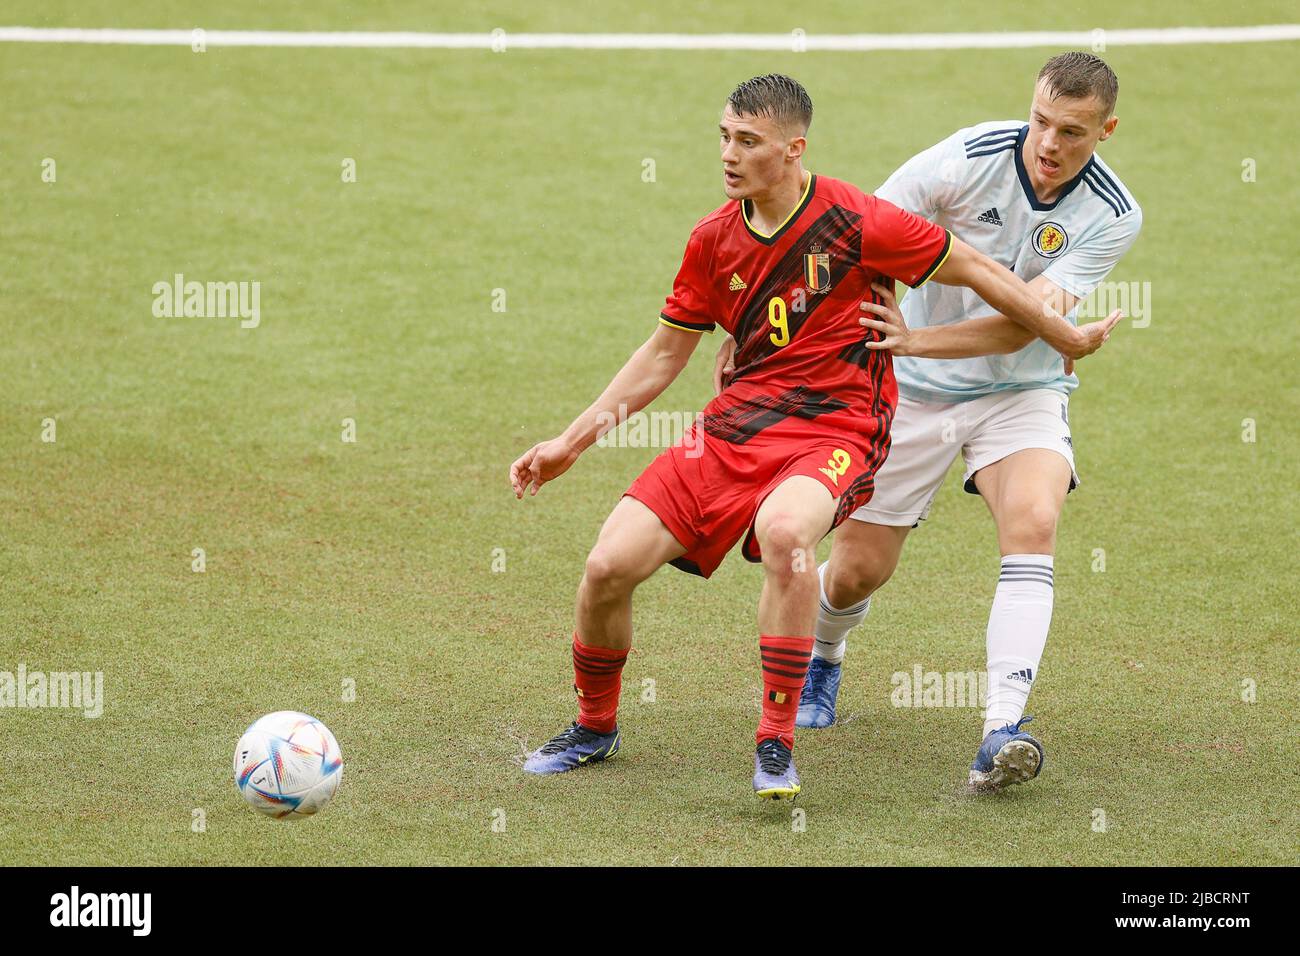 Belgium's Anthony Descotte and Scotland's Lewis Mayo fight for the ball during a soccer game between the U21 teams of Belgium and Scotland, Sunday 05 June 2022 in Sint-Truiden, the last qualification match (out of 8) in the group I, for the 2023 Under-21 European Championships. BELGA PHOTO BRUNO FAHY Stock Photo